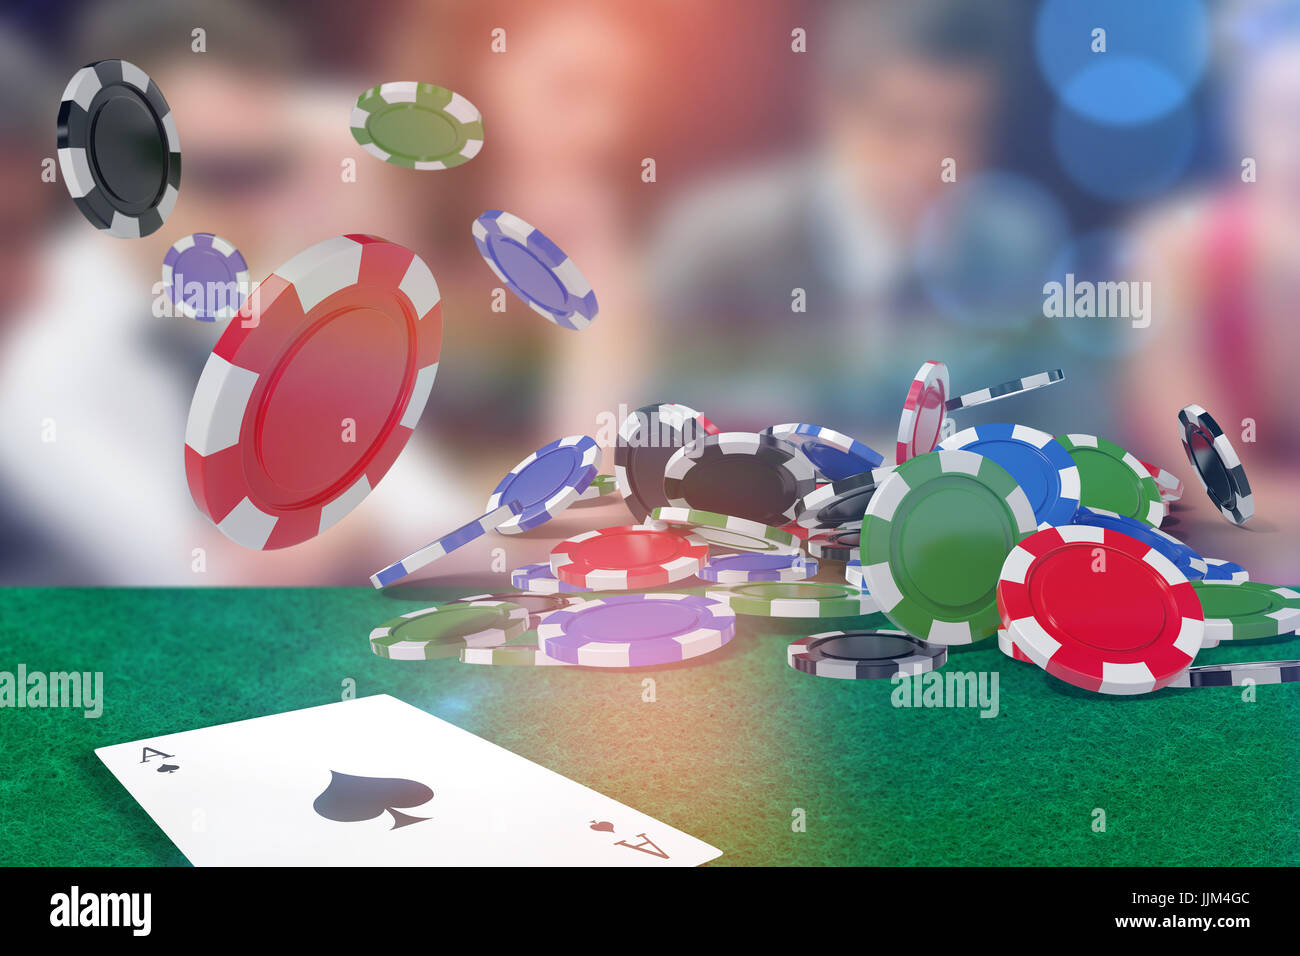 Composite image of vector image of 3d gambling chips Stock Photo